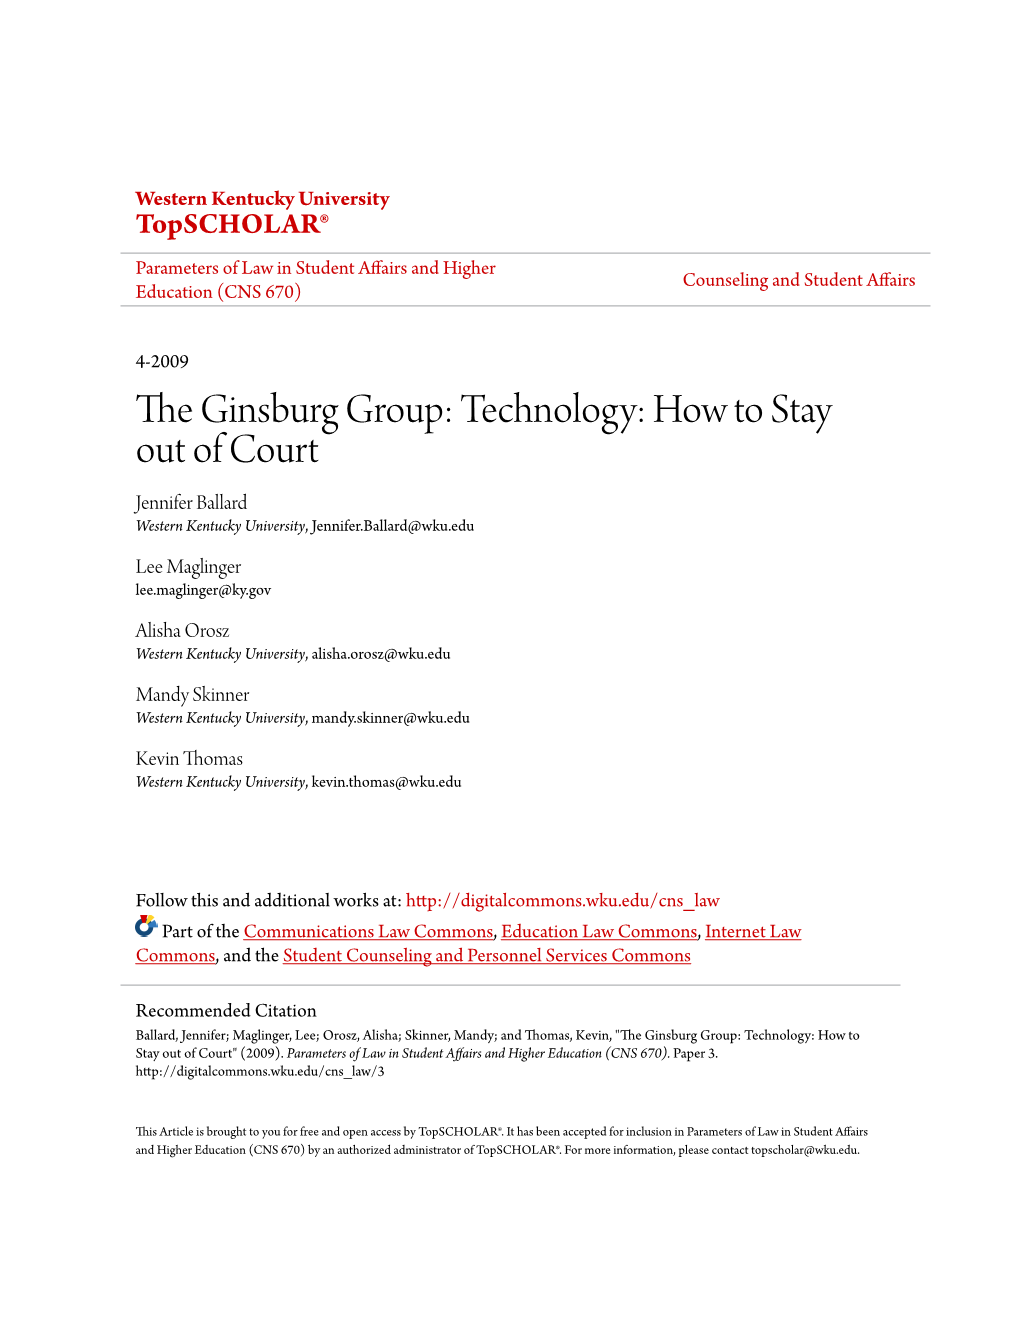 The Ginsburg Group: Technology: How to Stay Out